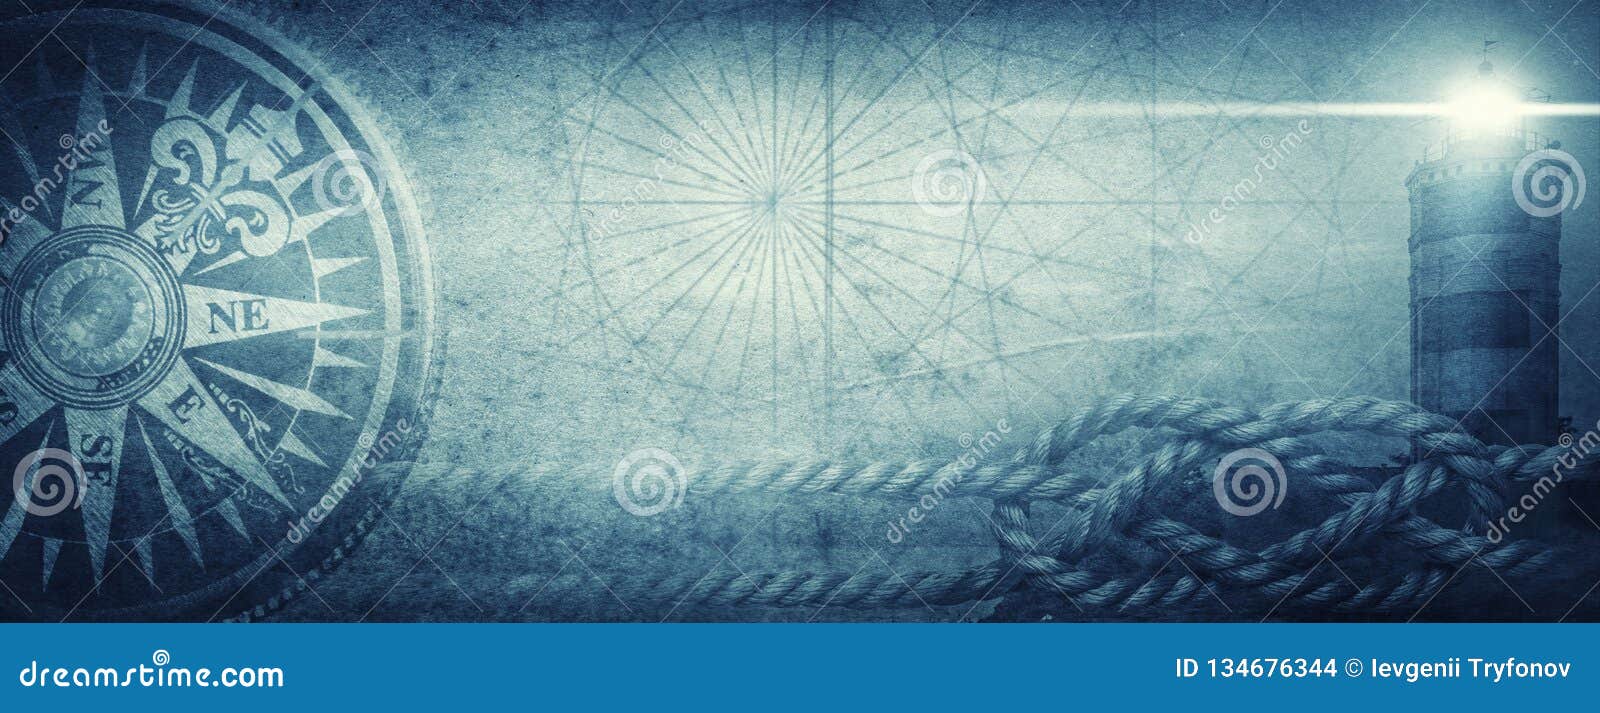 old sea compass, lighthouse and sea knot on abstract map background. pirate, explorer, travel and nautical theme grunge